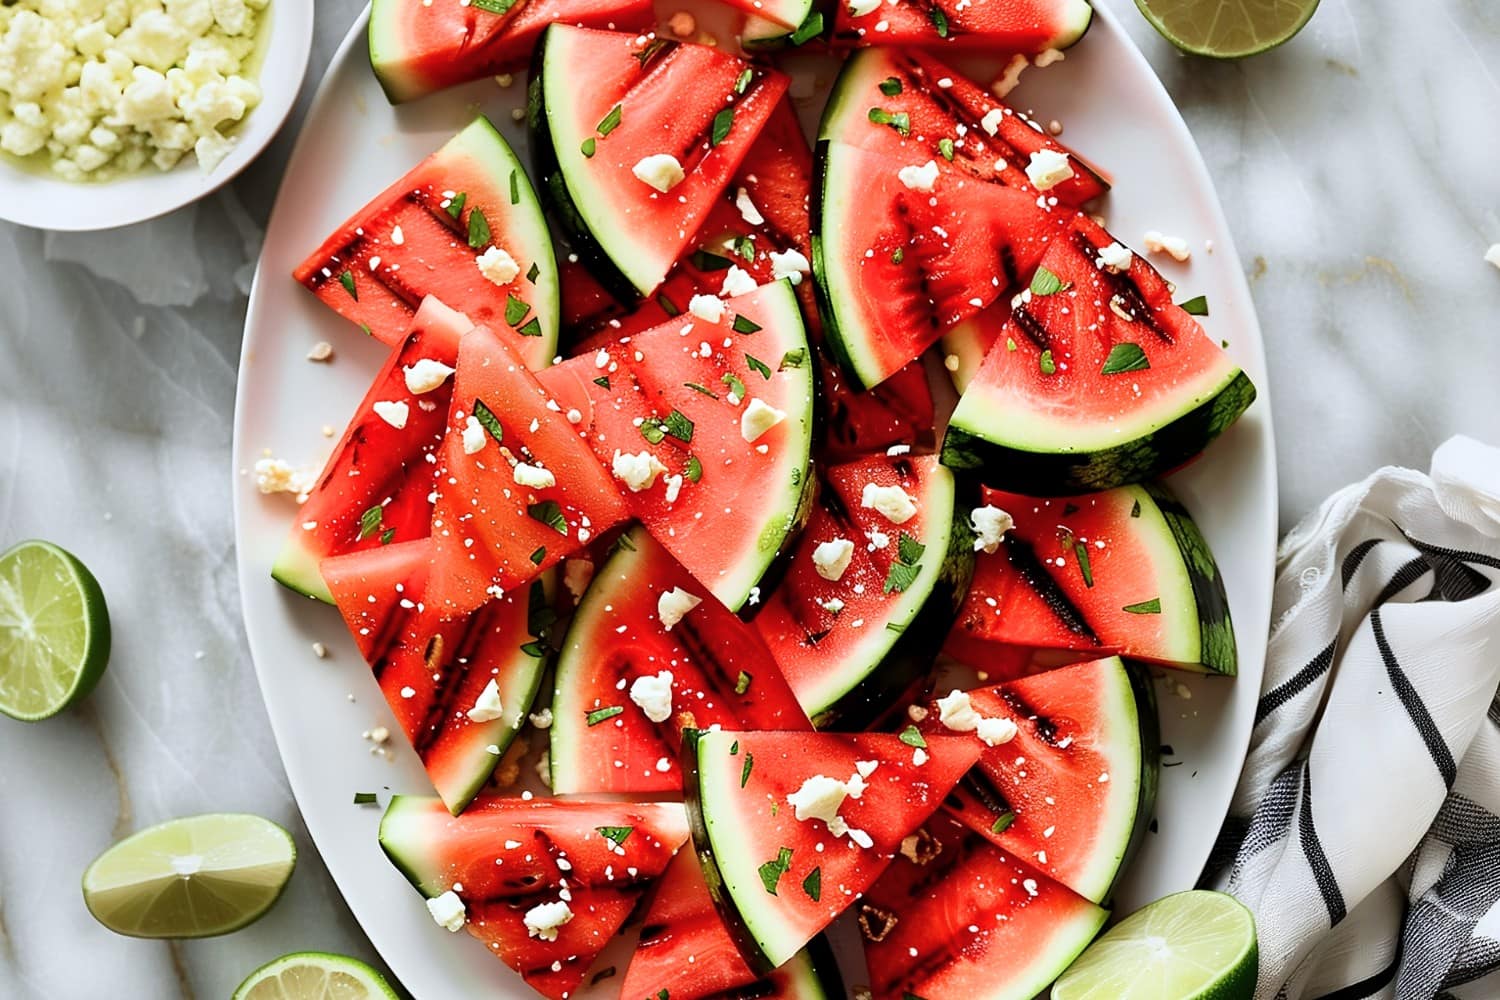 Succulent grilled watermelon wedges with feta and lime, featuring charred grill marks and a hint of smokiness